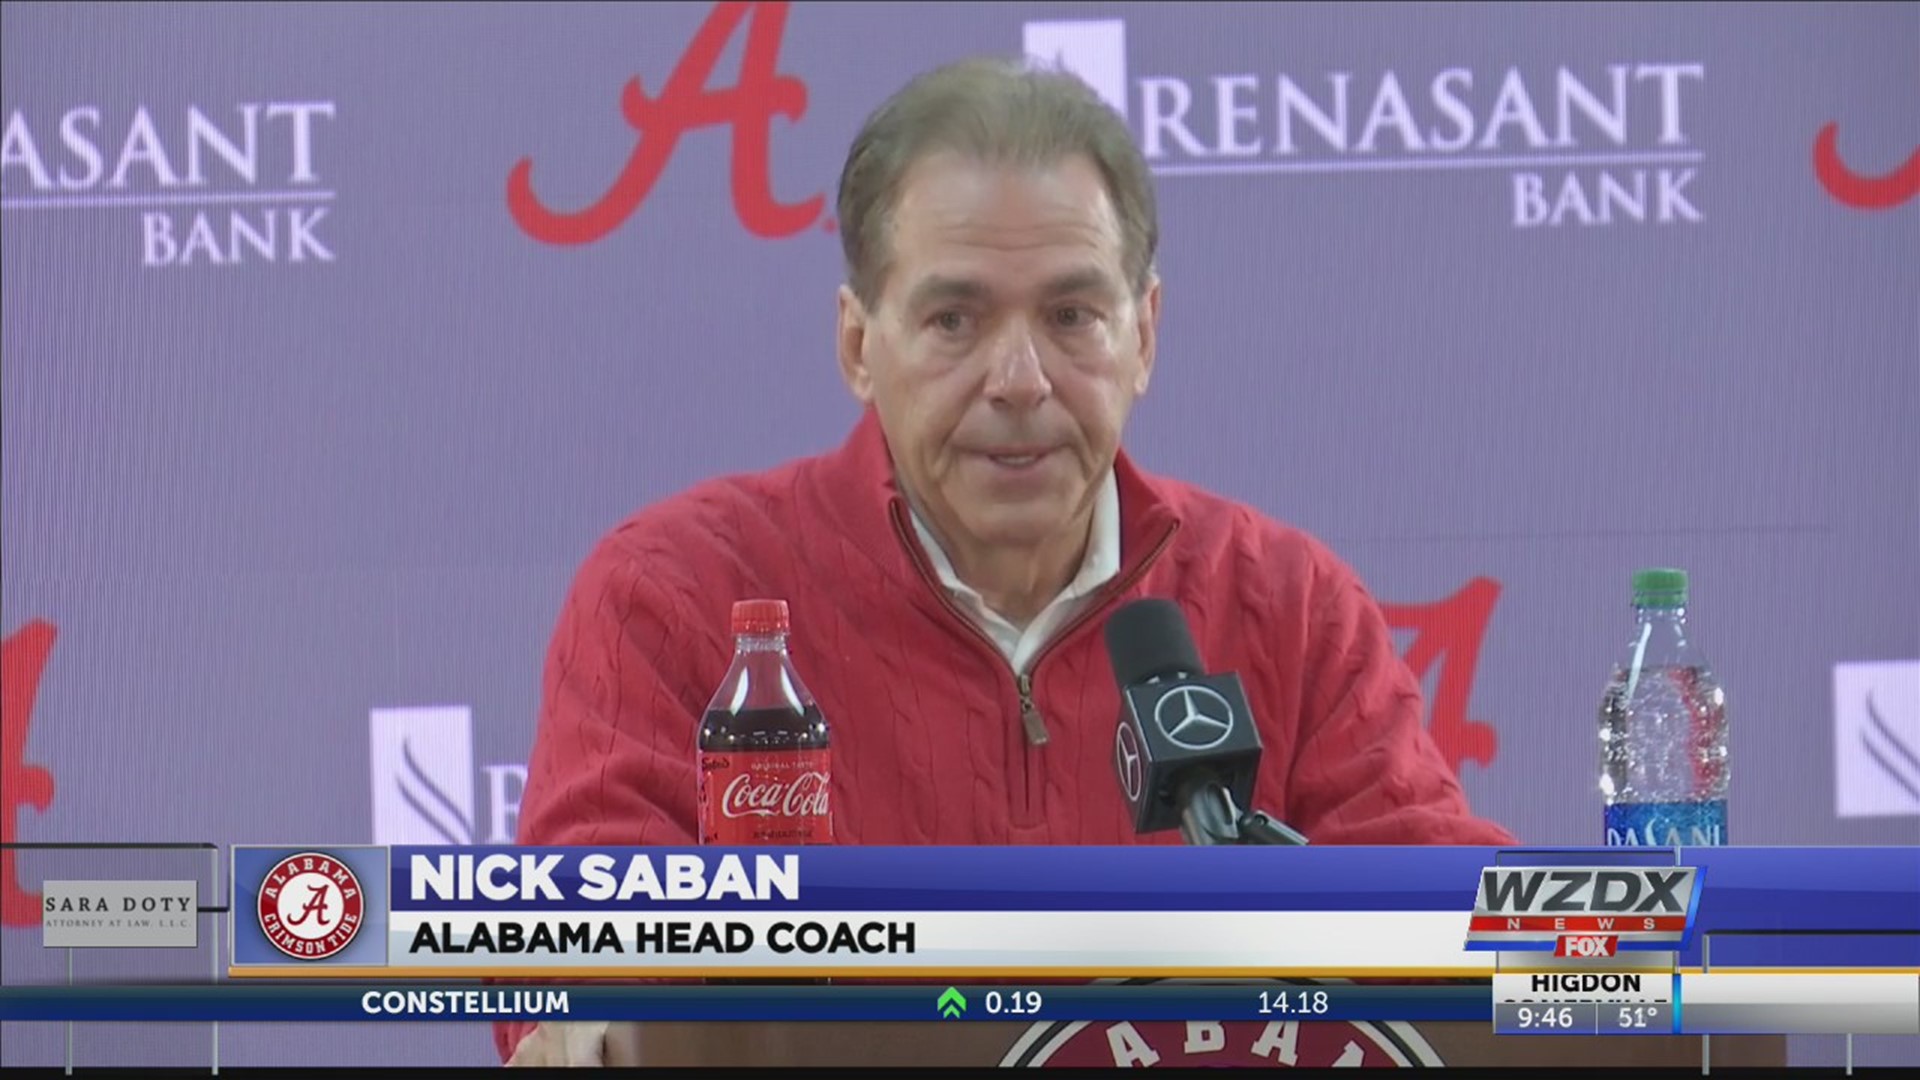 Nick Saban and the Crimson Tide are back in game week mode. This Saturday, they'll look to take down top-ranked LSU at Bryant-Denny Stadium.